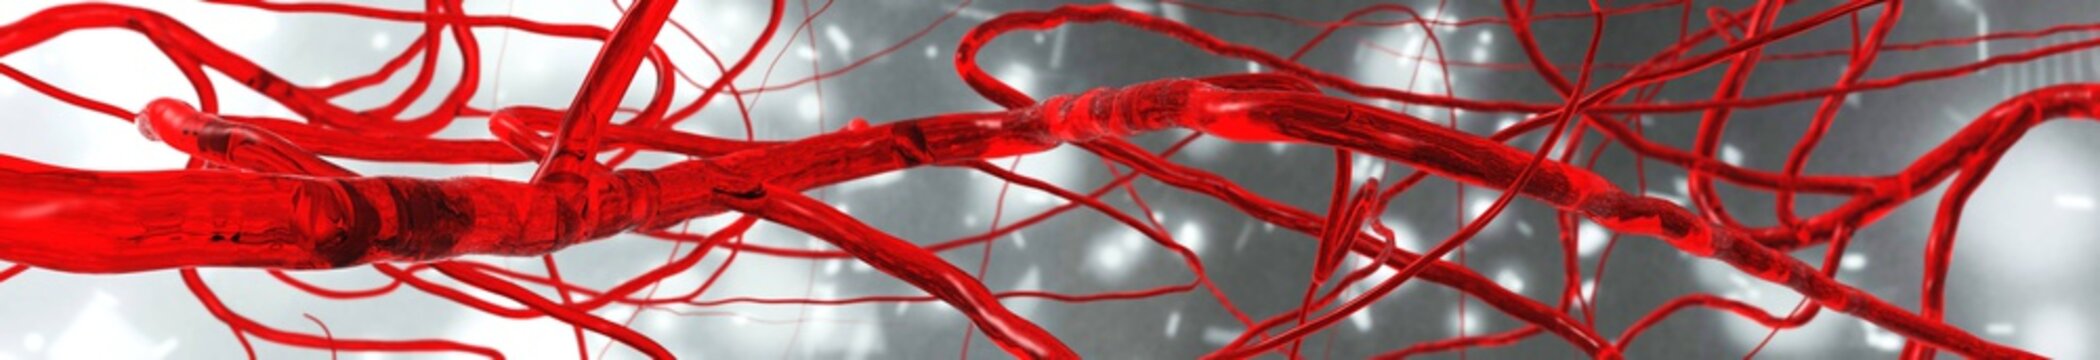 Blood vessels, circulatory system, arteries and veins, banner
